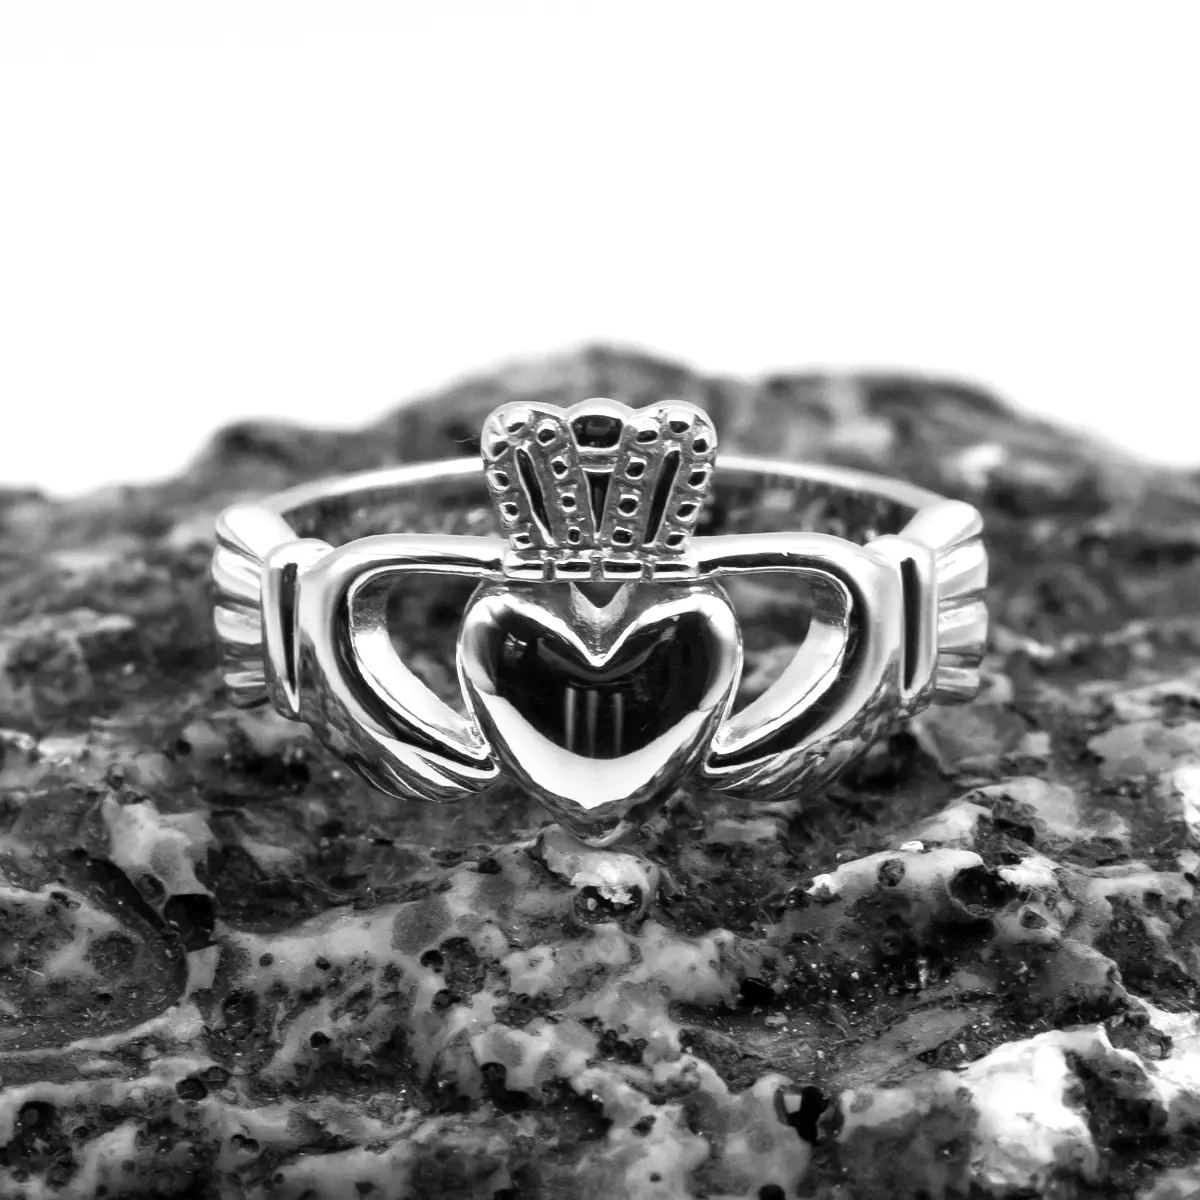 Complete Guide To Claddagh Rings | FAQs | Fallers Irish Jewelry